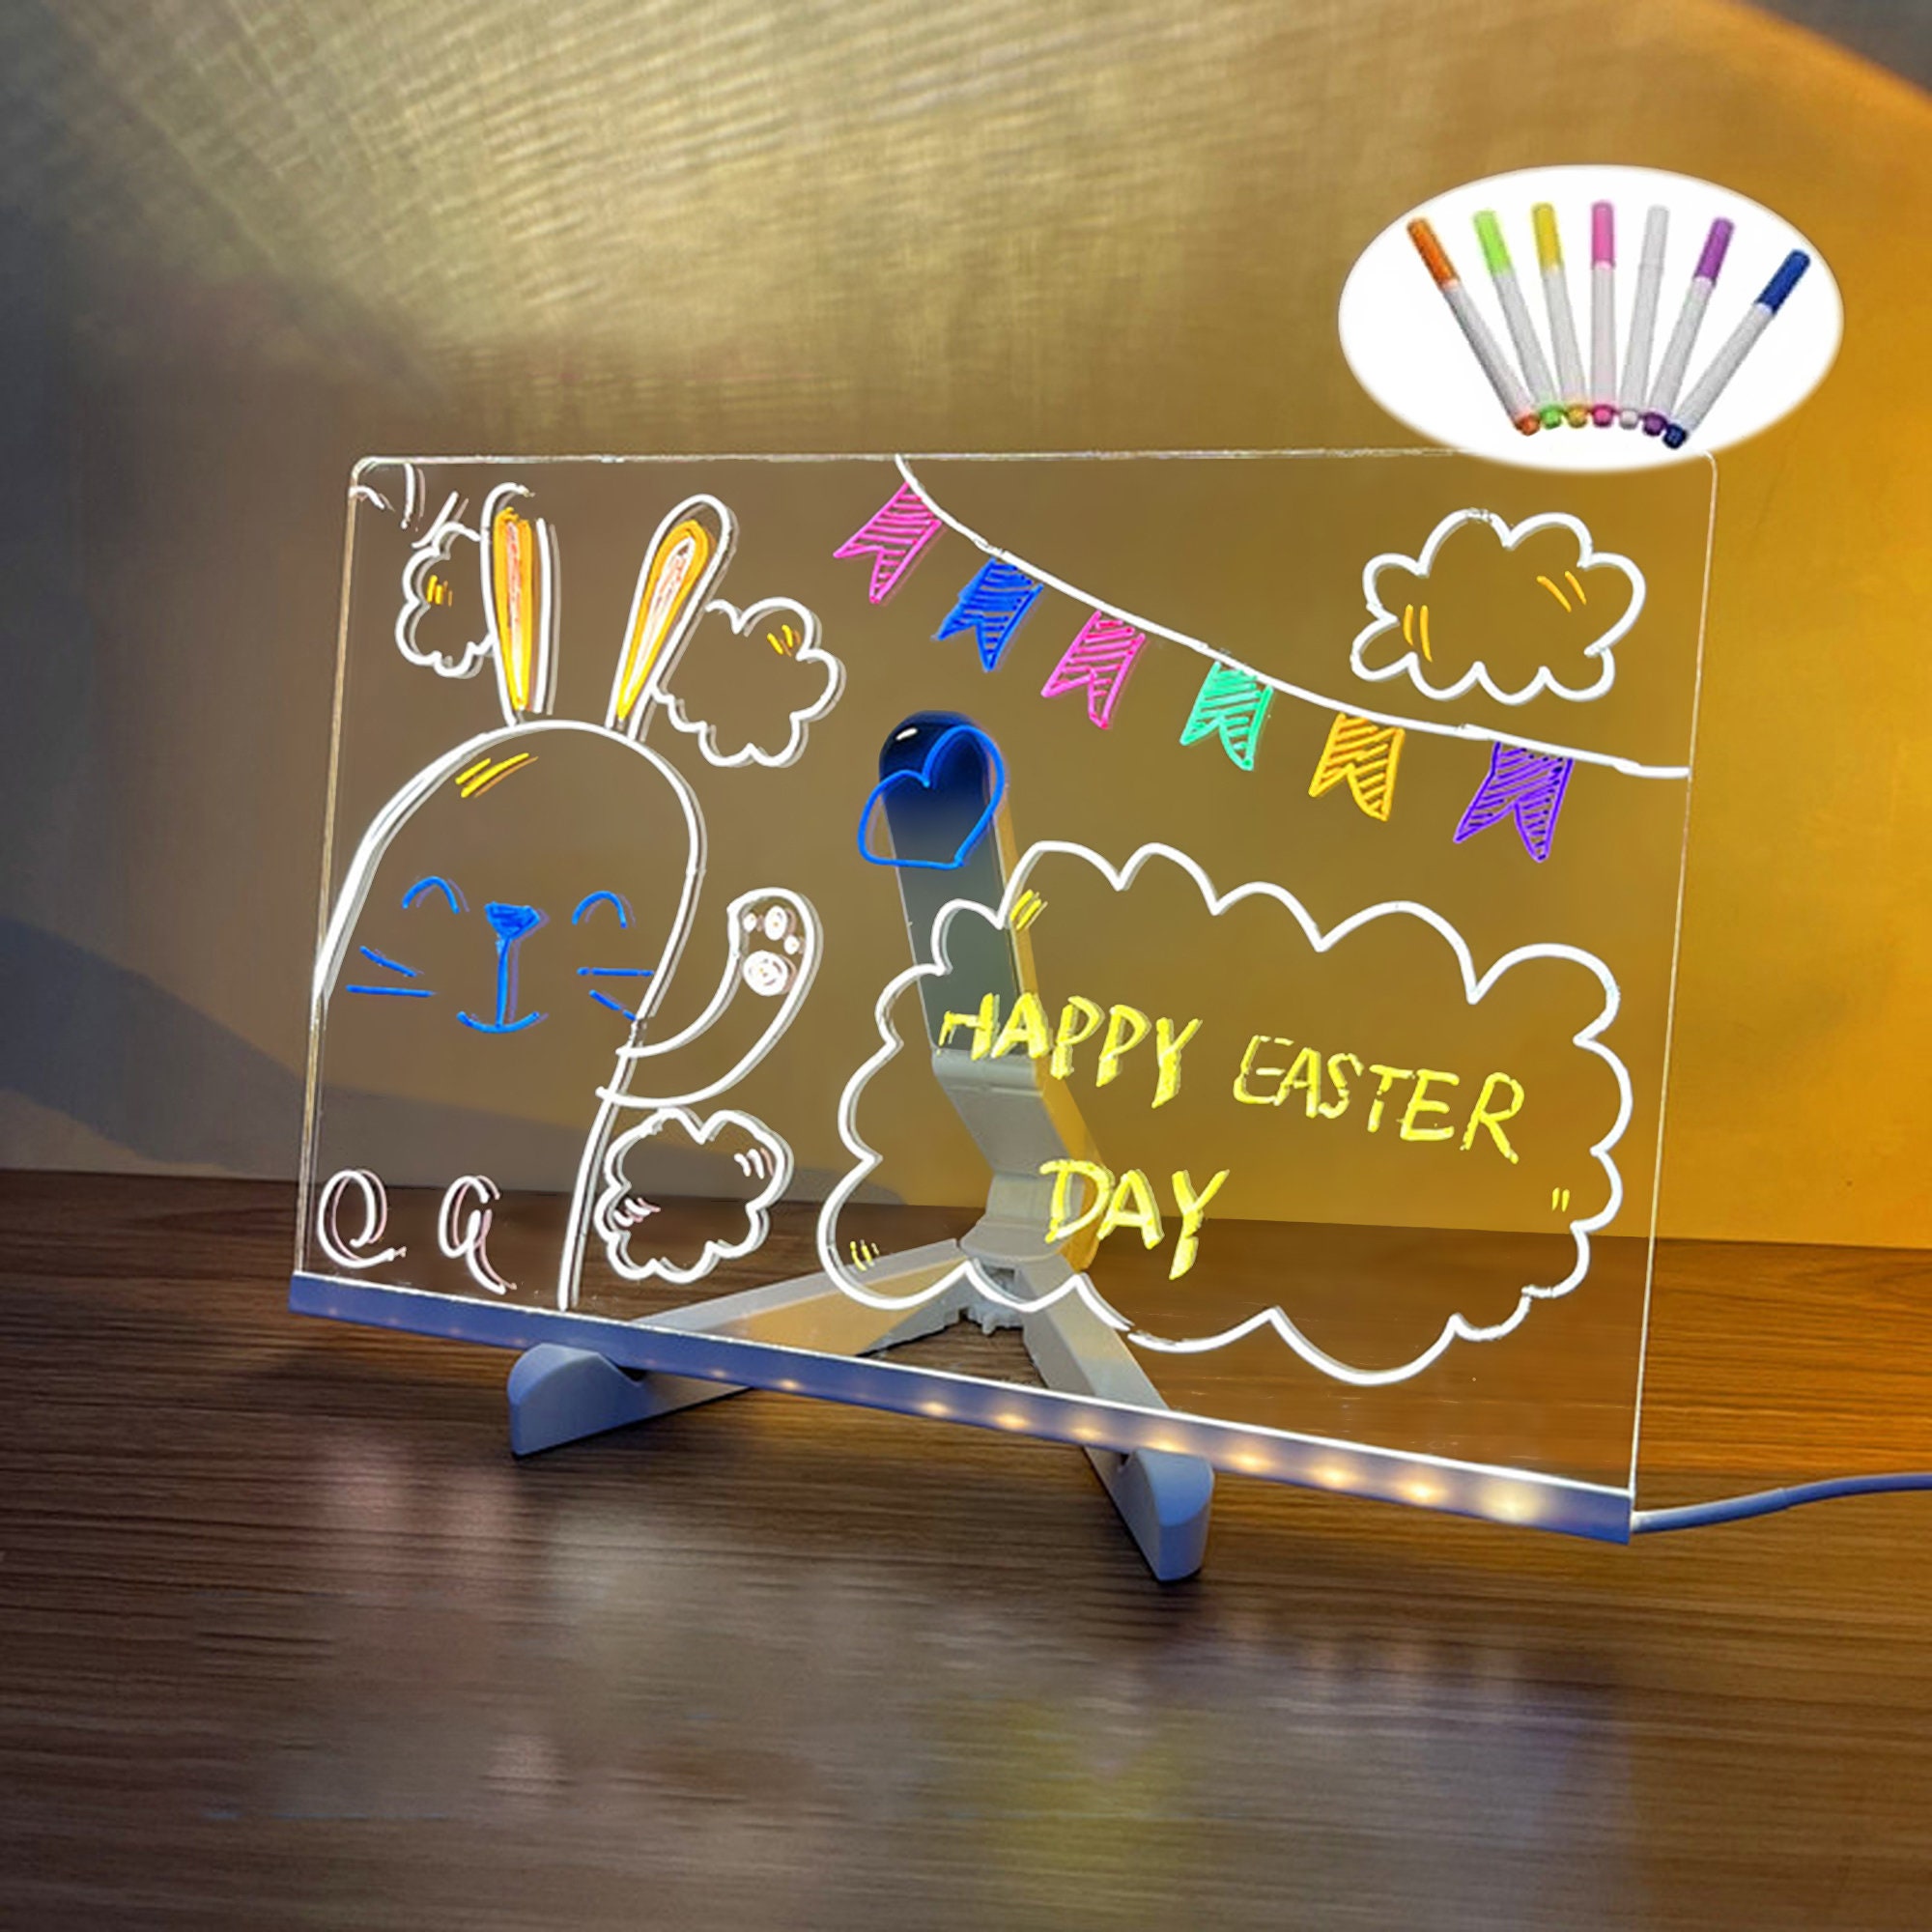 Rewritable Led Light Drawing Board, Clear White Led Message Board with  Light, Acrylic Led Note Board Light Up Calendar with Stand for Desk Fridge #